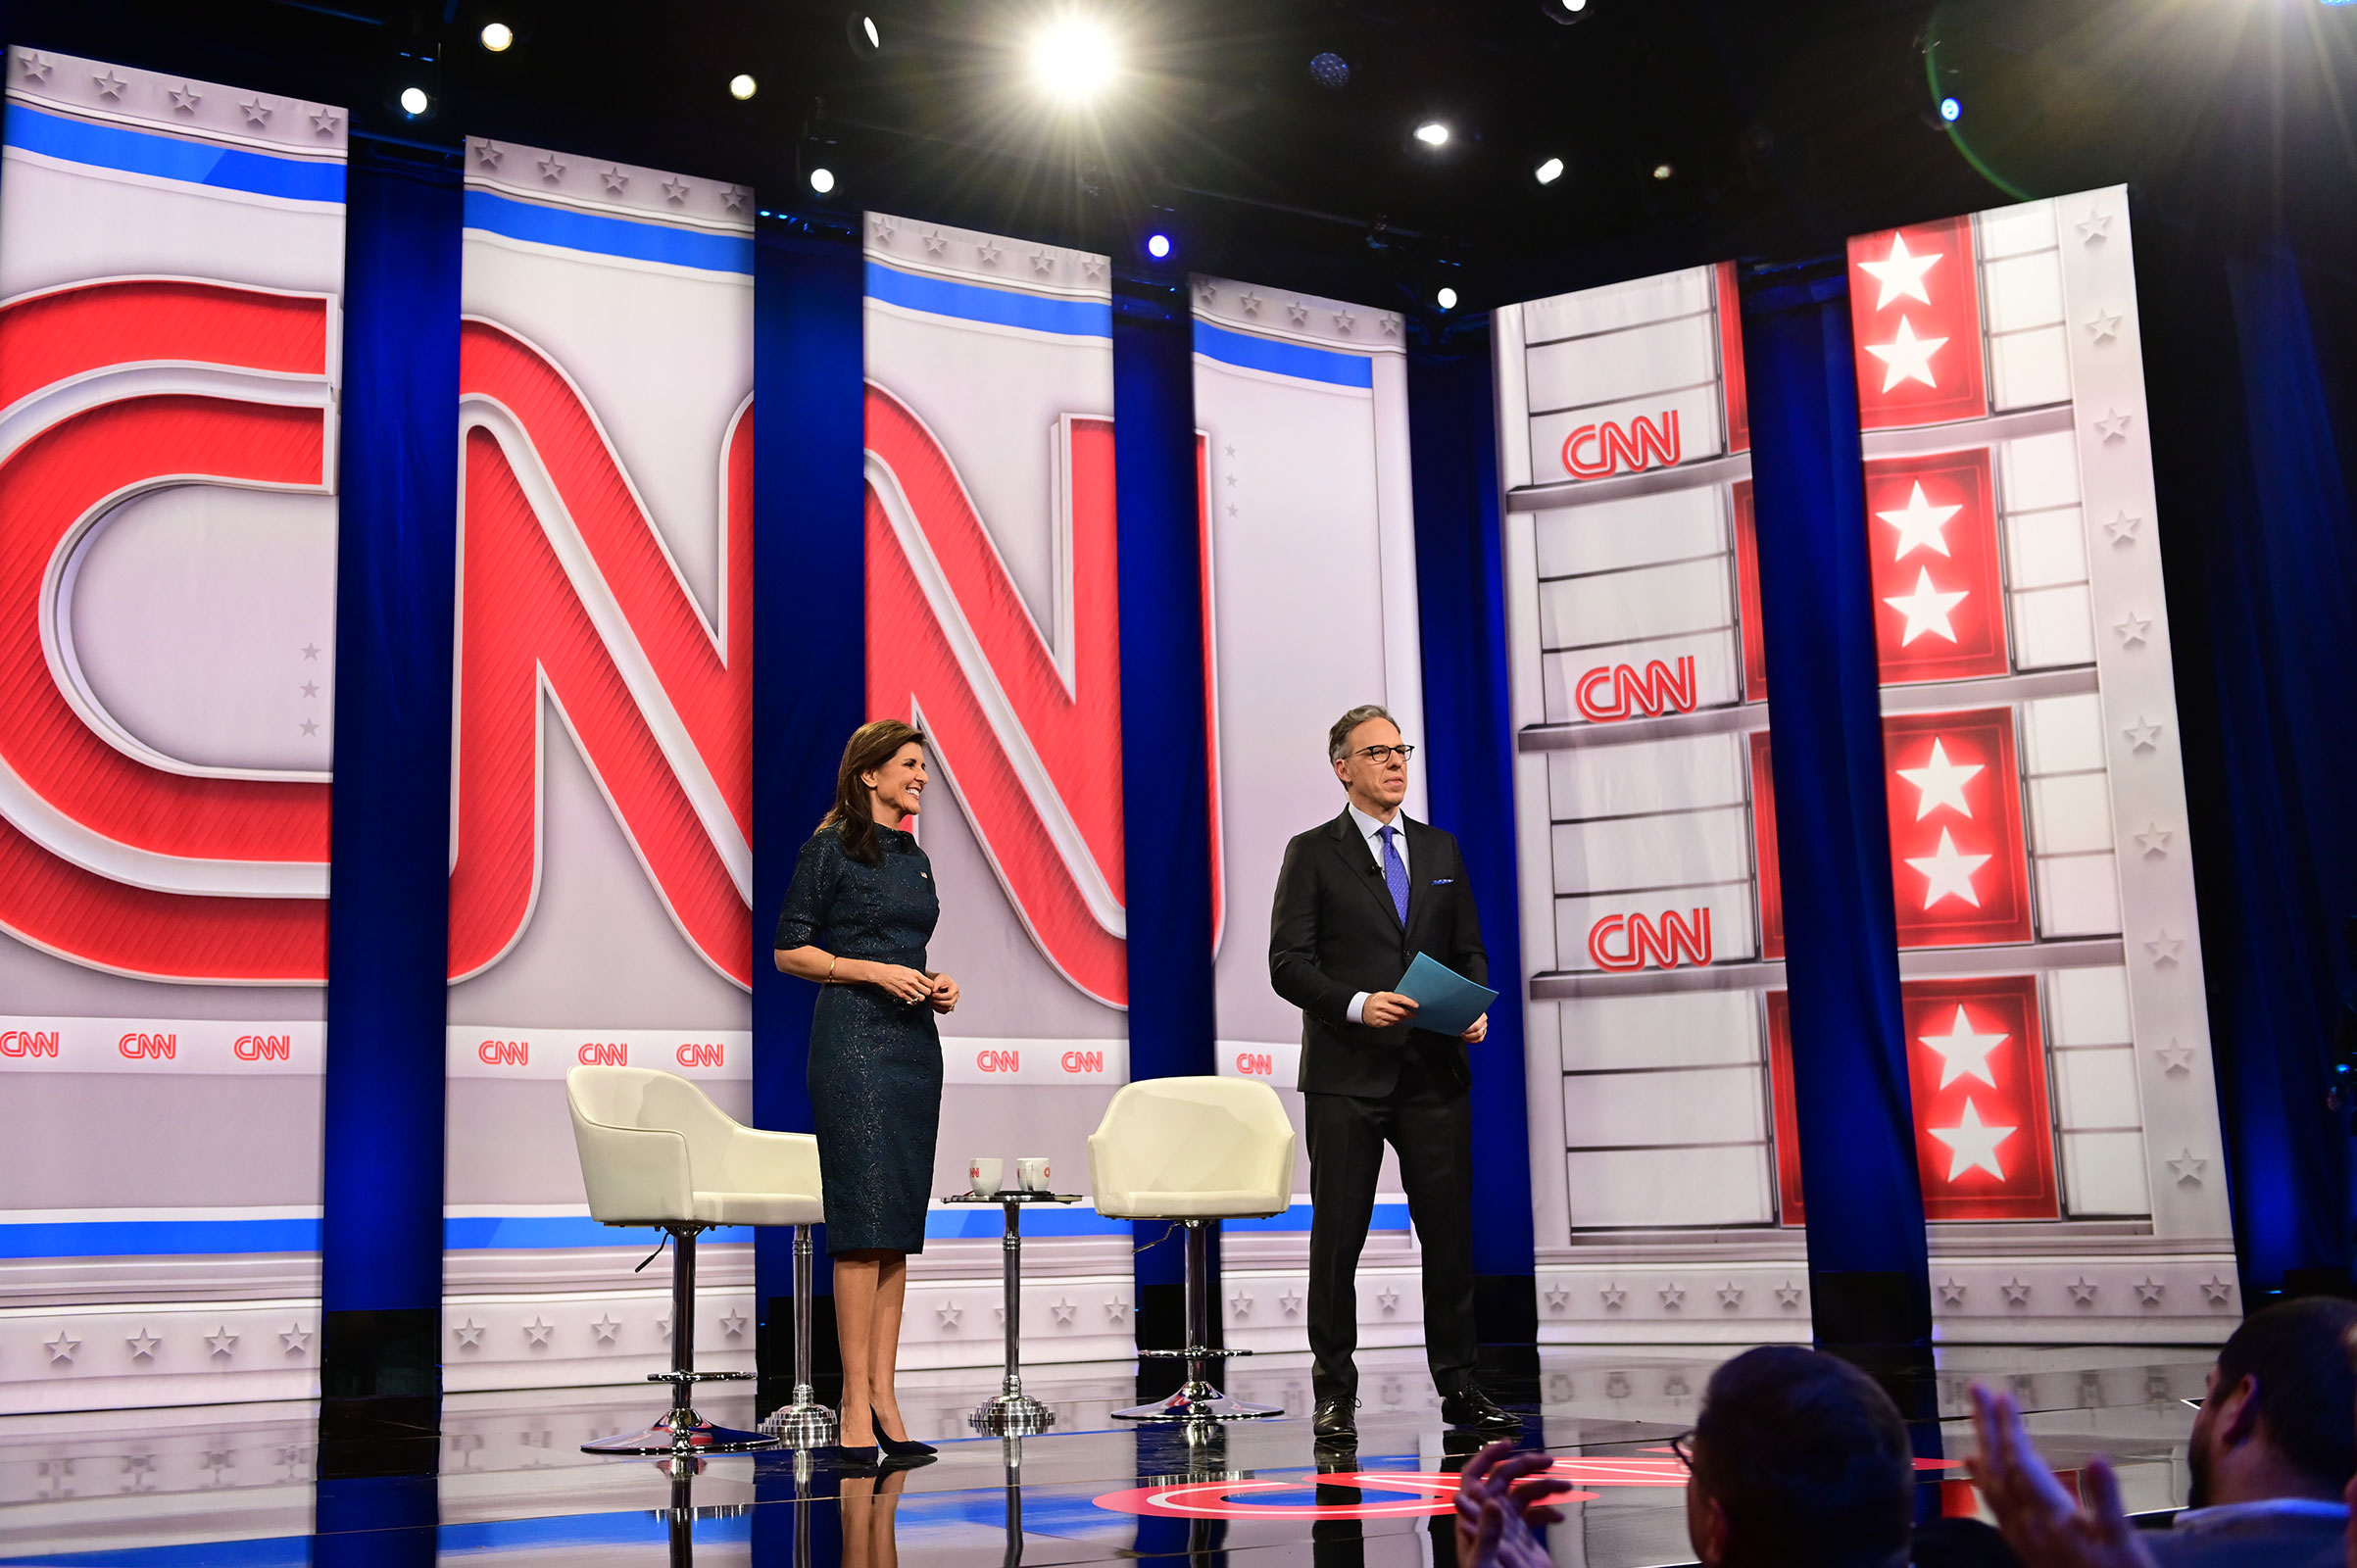 Former South Carolina Gov. Nikki Haley participates in a CNN Republican Presidential Town Hall moderated by CNN’s Jake Tapper at New England College in Henniker, New Hampshire, on January 18.